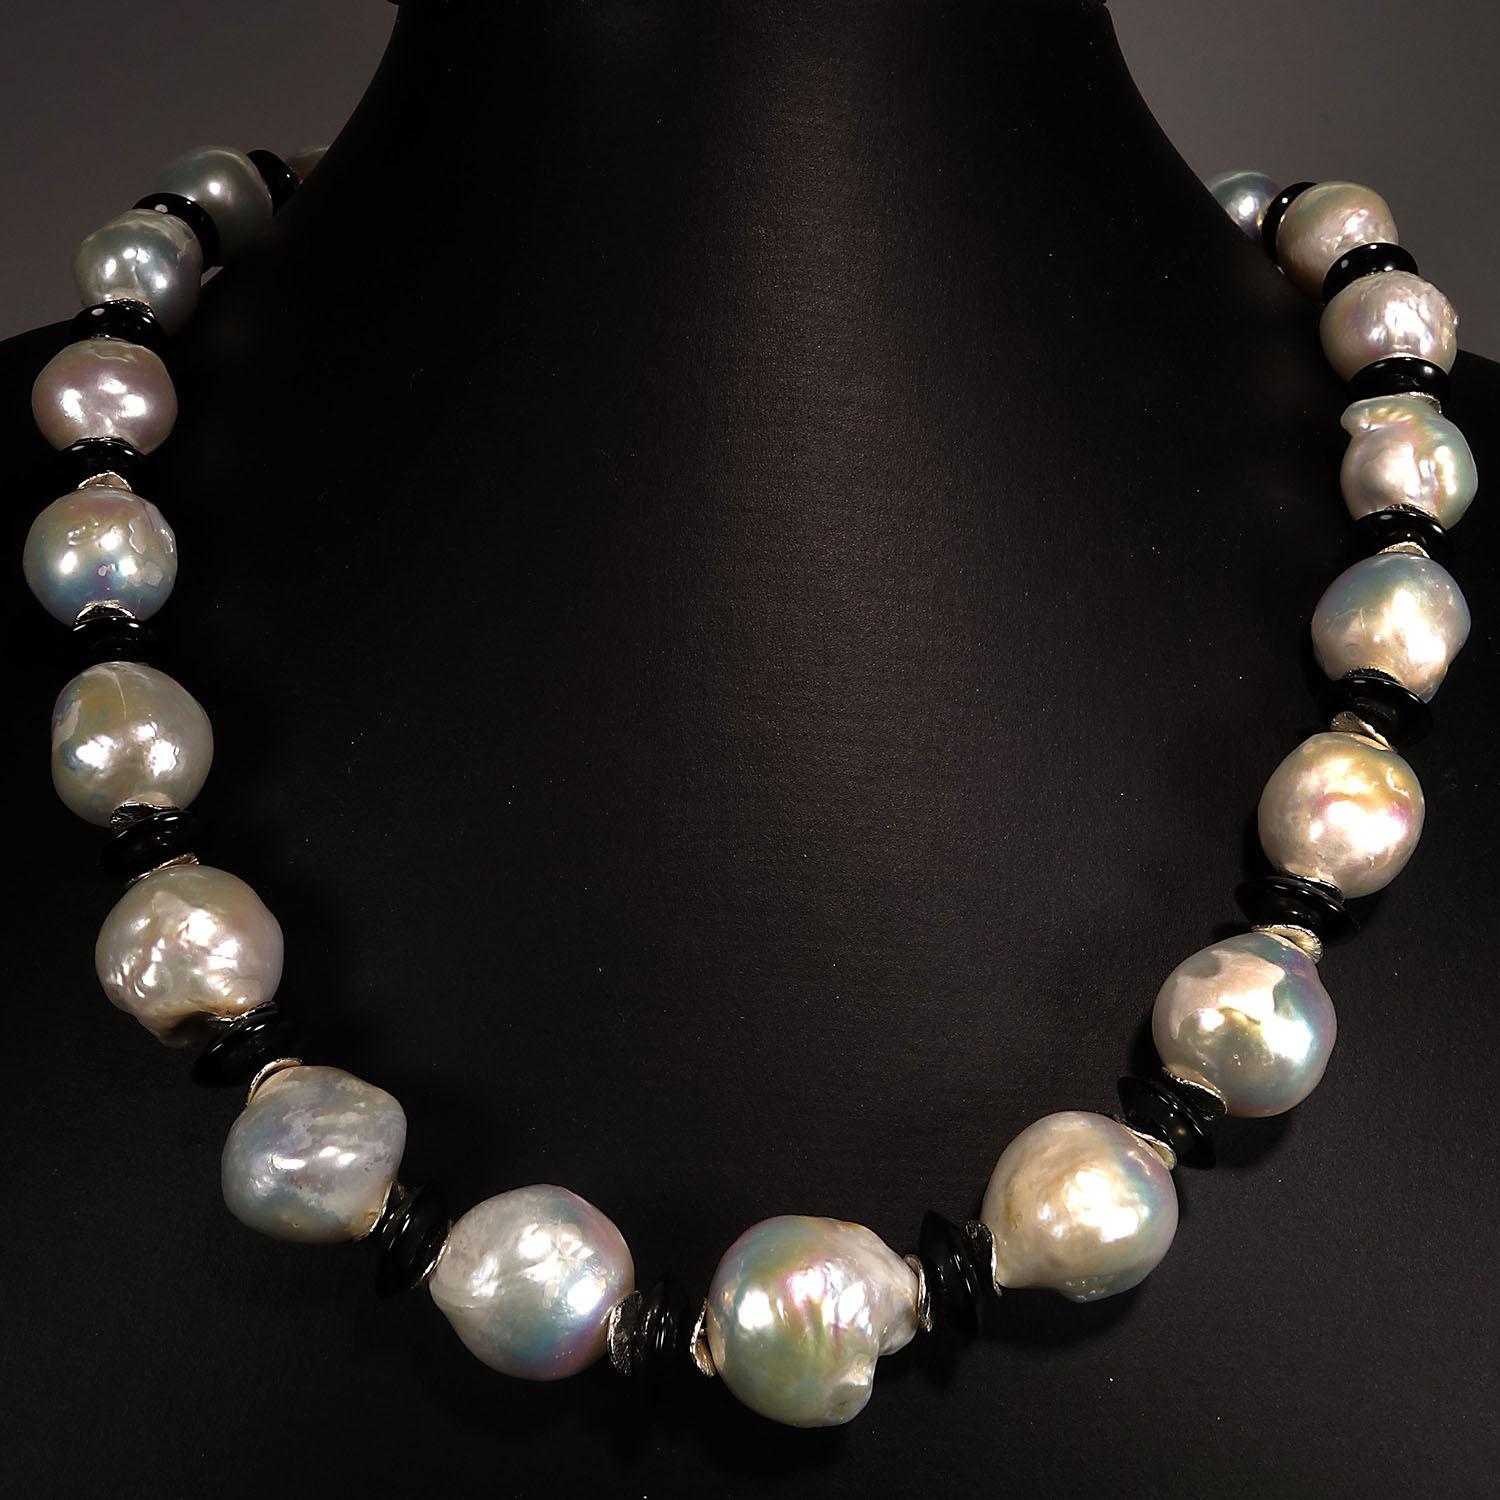 Bead AJD White Baroque Pearl Black Tourmaline Accents Necklace June Birthstone